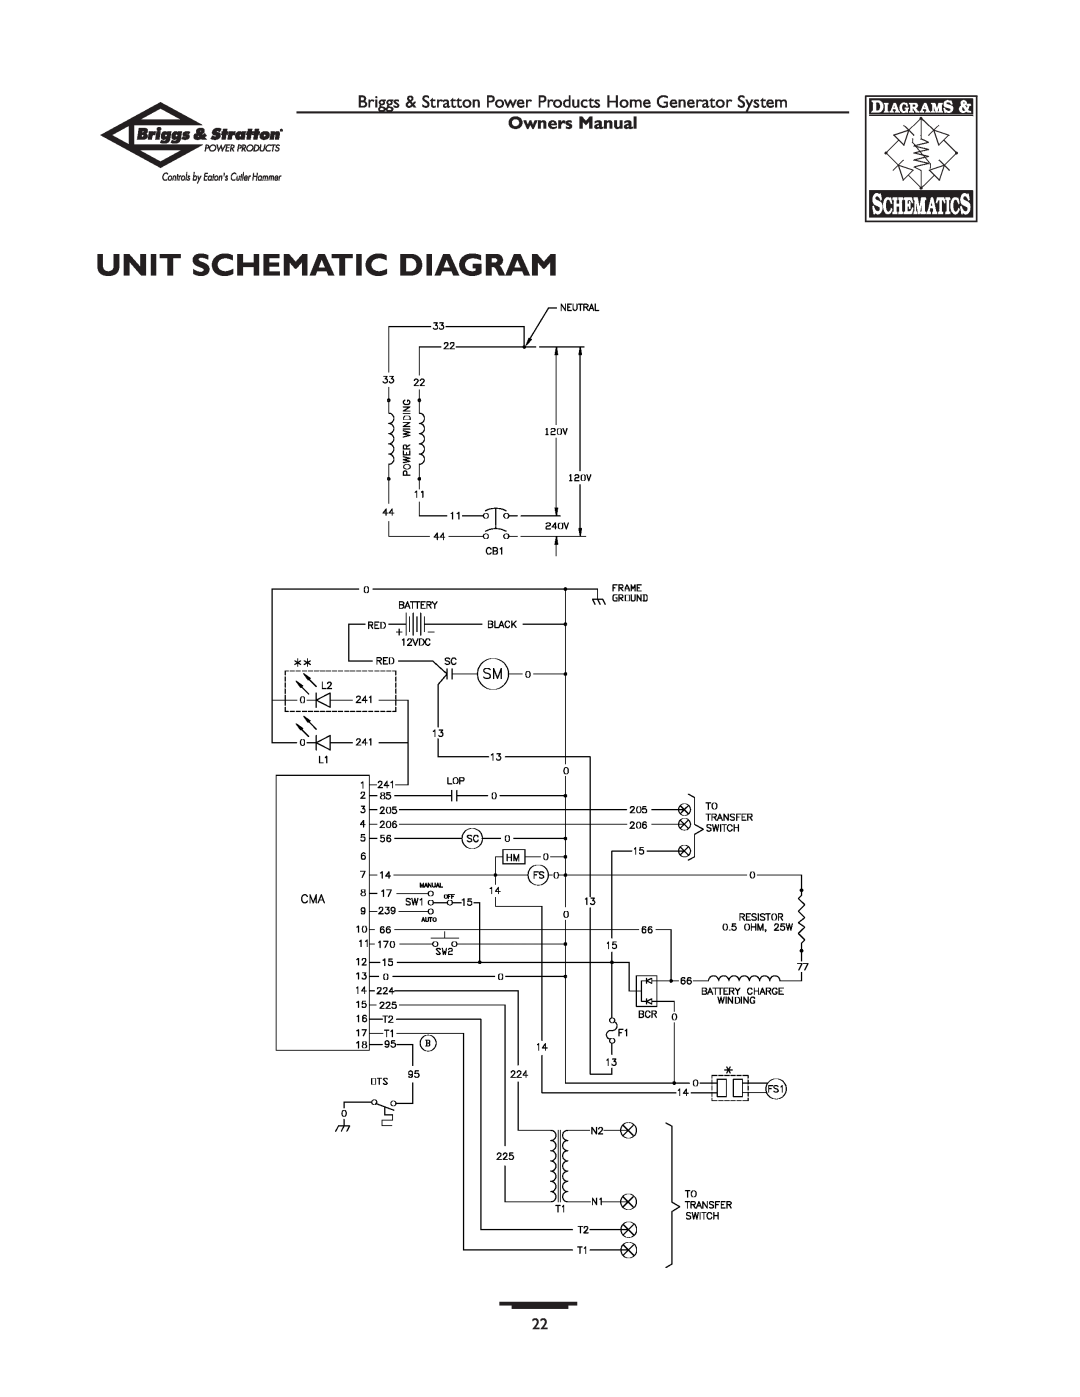 Briggs & Stratton 190839GS owner manual Unit Schematic Diagram, Owners Manual 